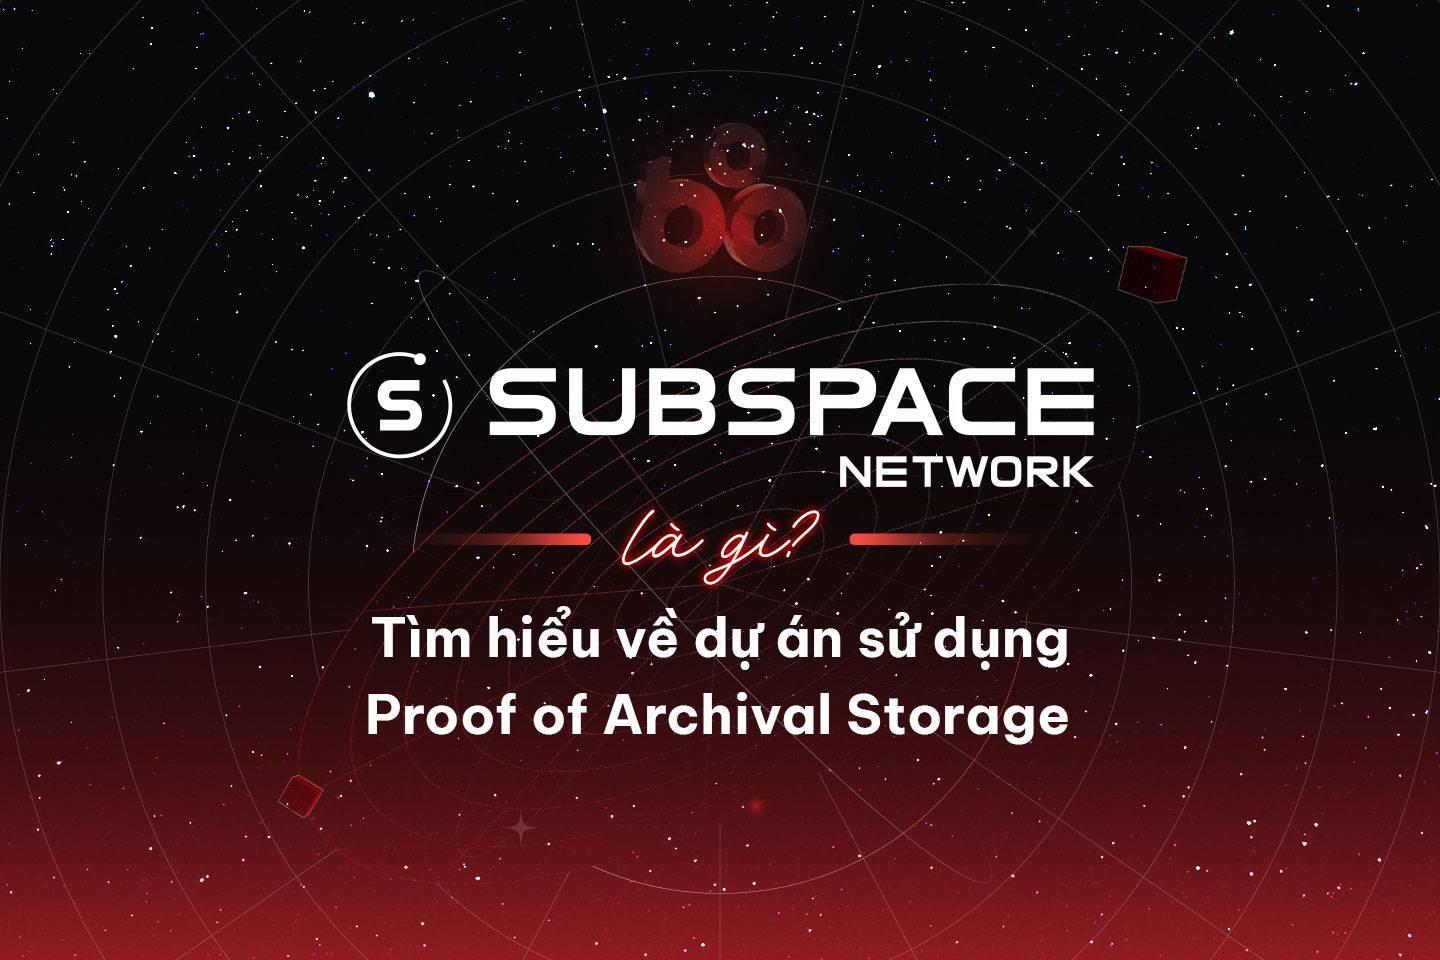 subspace-network-la-gi-tim-hieu-ve-du-an-su-dung-proof-of-archival-storage